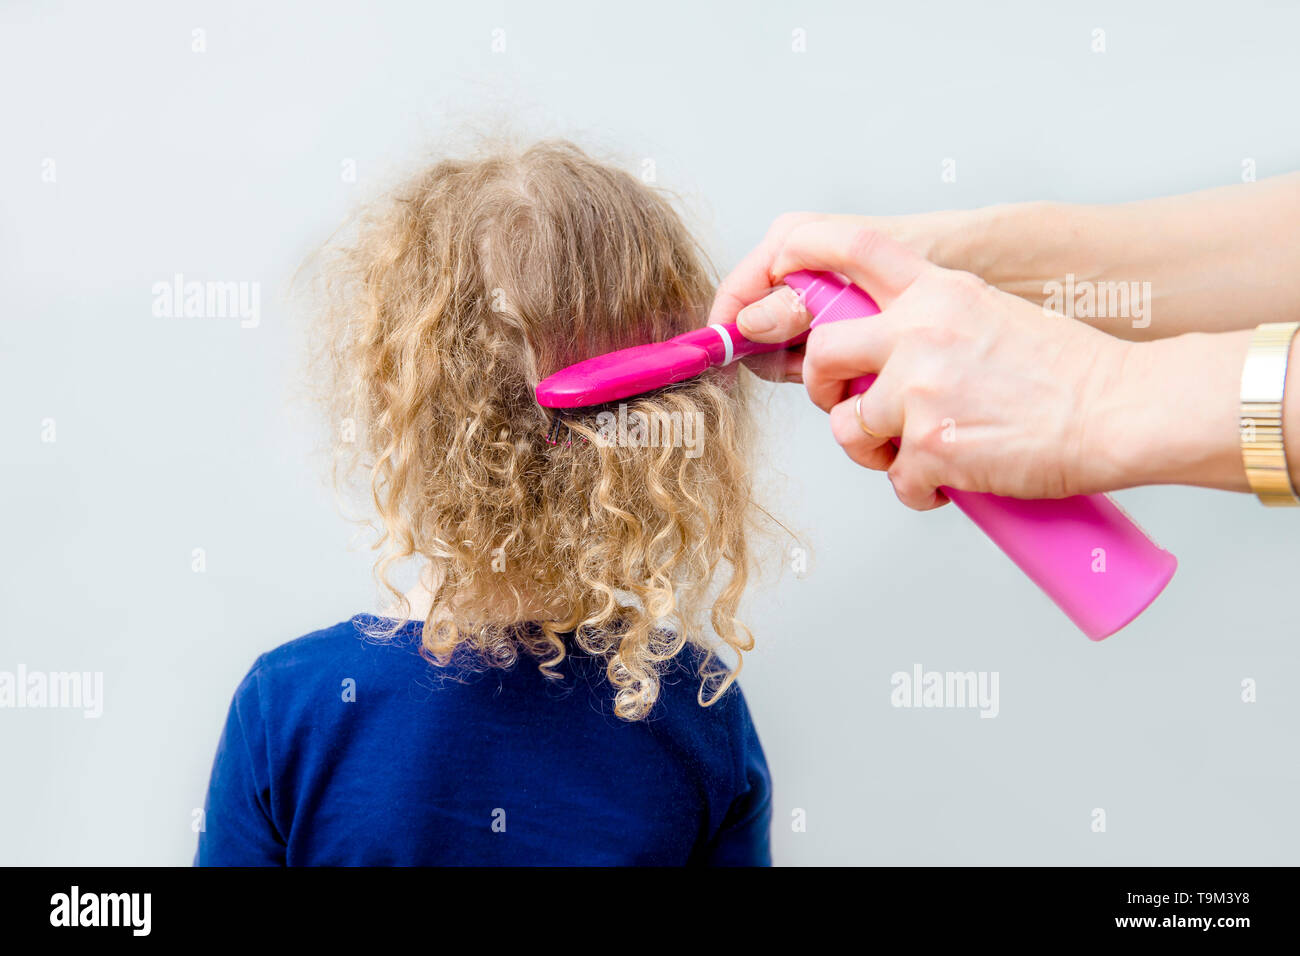 Close up view of mother hands spray curly hair balm on to girl child hair to help combing messy curly hair concept. Indoors minimal gray background. Stock Photo